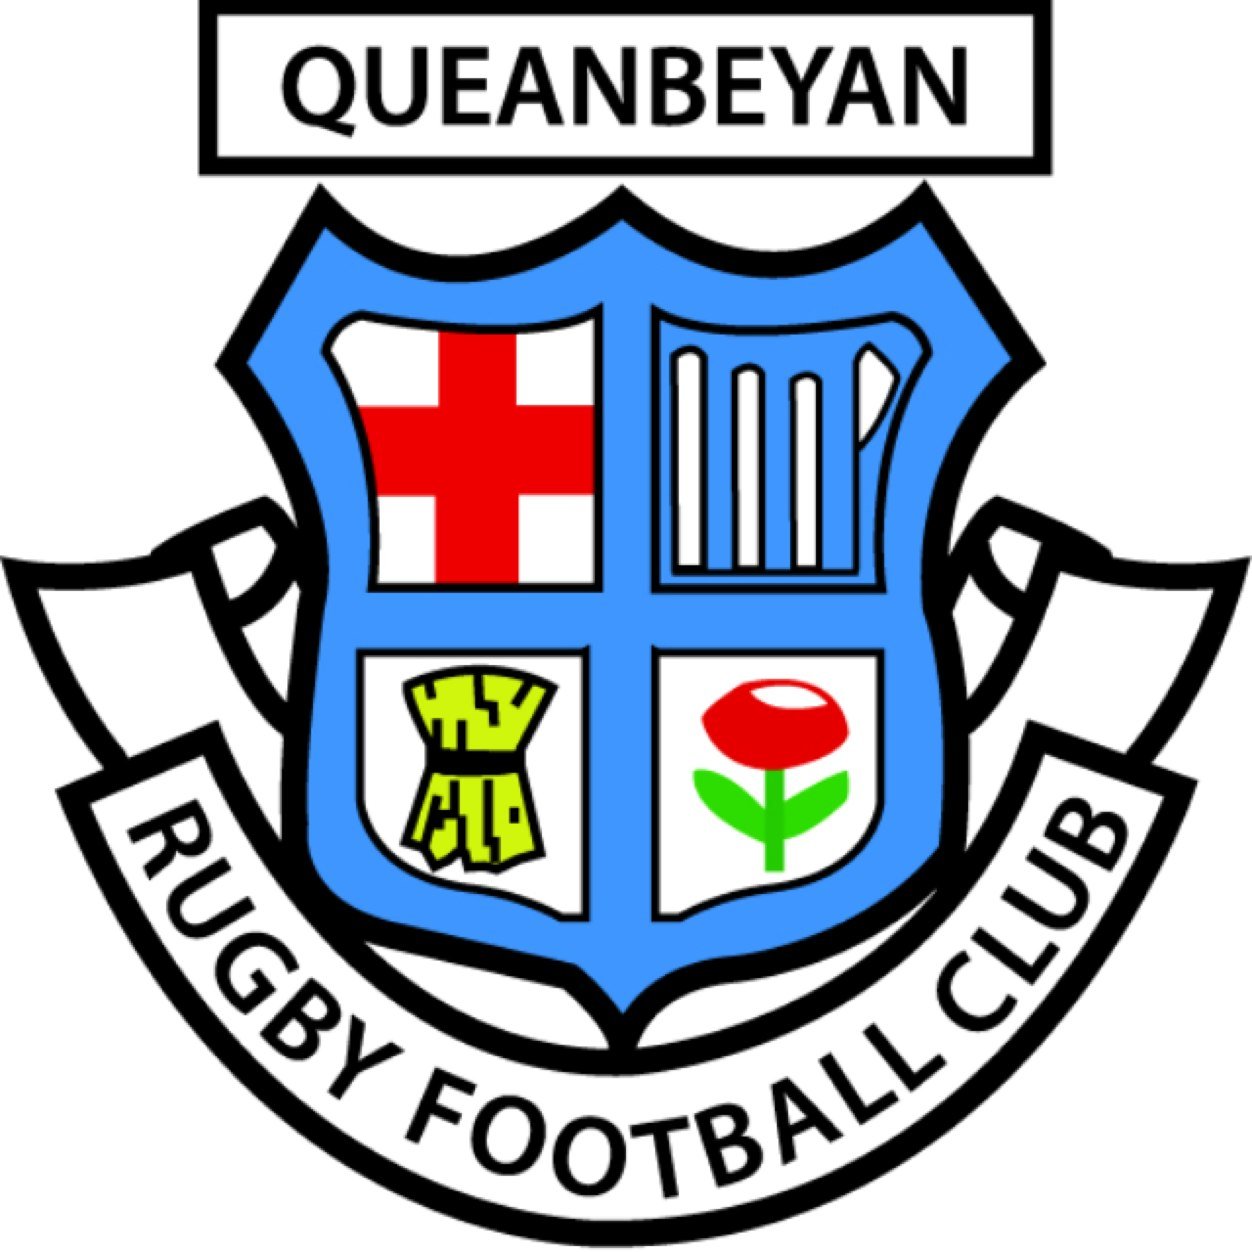 Est. 1954 Queanbeyan Whites Rugby Union Football Club, 2016 John I Dent Cup Grand Finalists, ACT Premier Rugby.